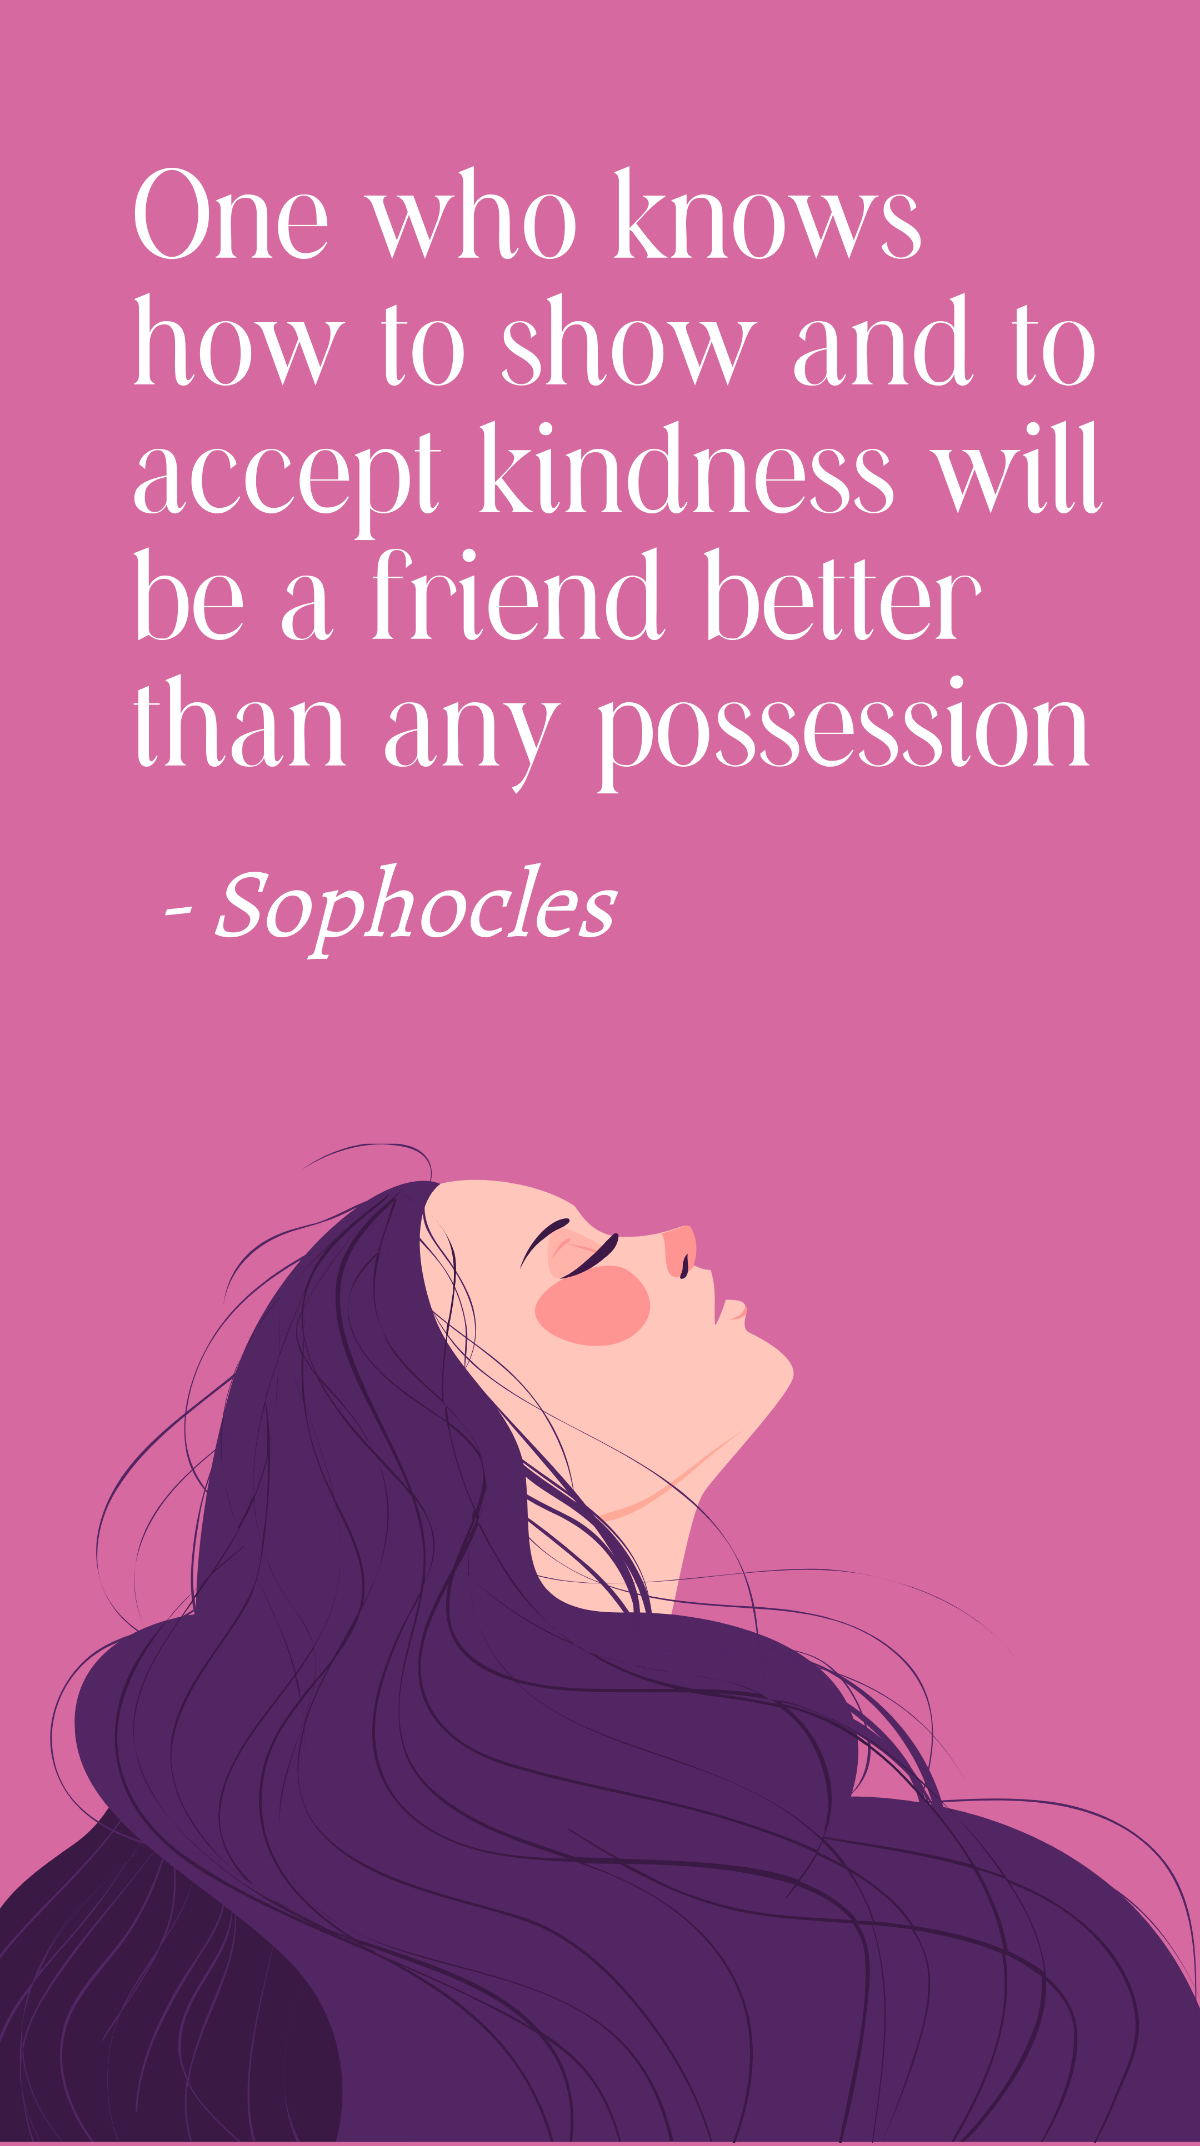 Sophocles - One who knows how to show and to accept kindness will be a friend better than any possession